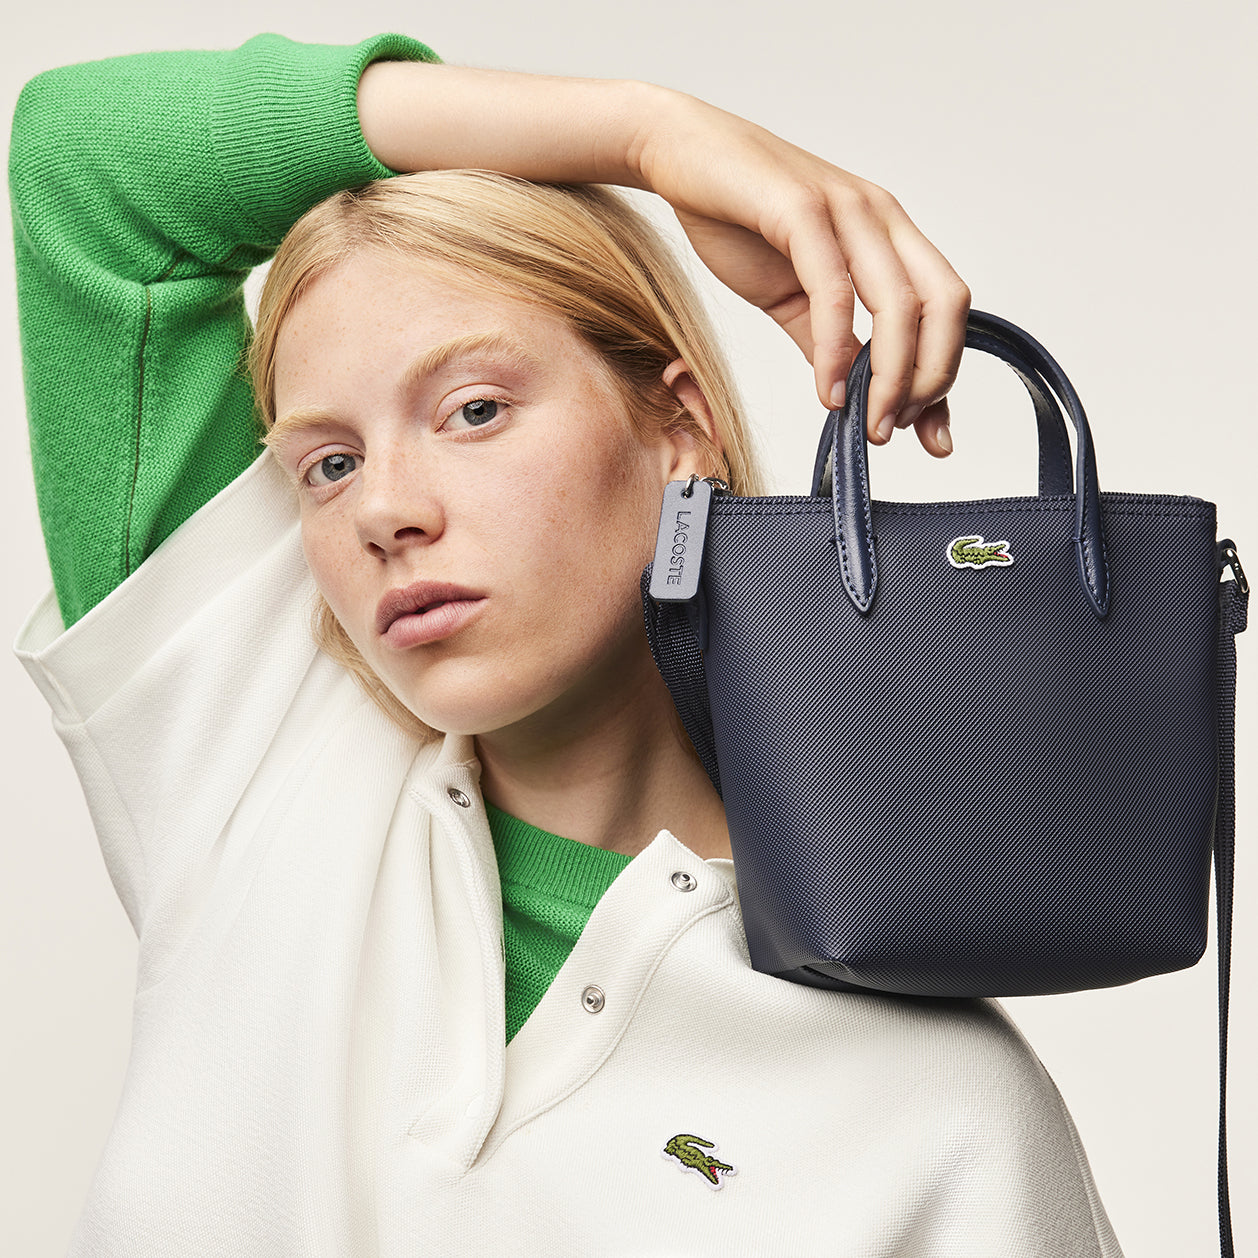 Lacoste Vertical or Horizontal Tote Bag